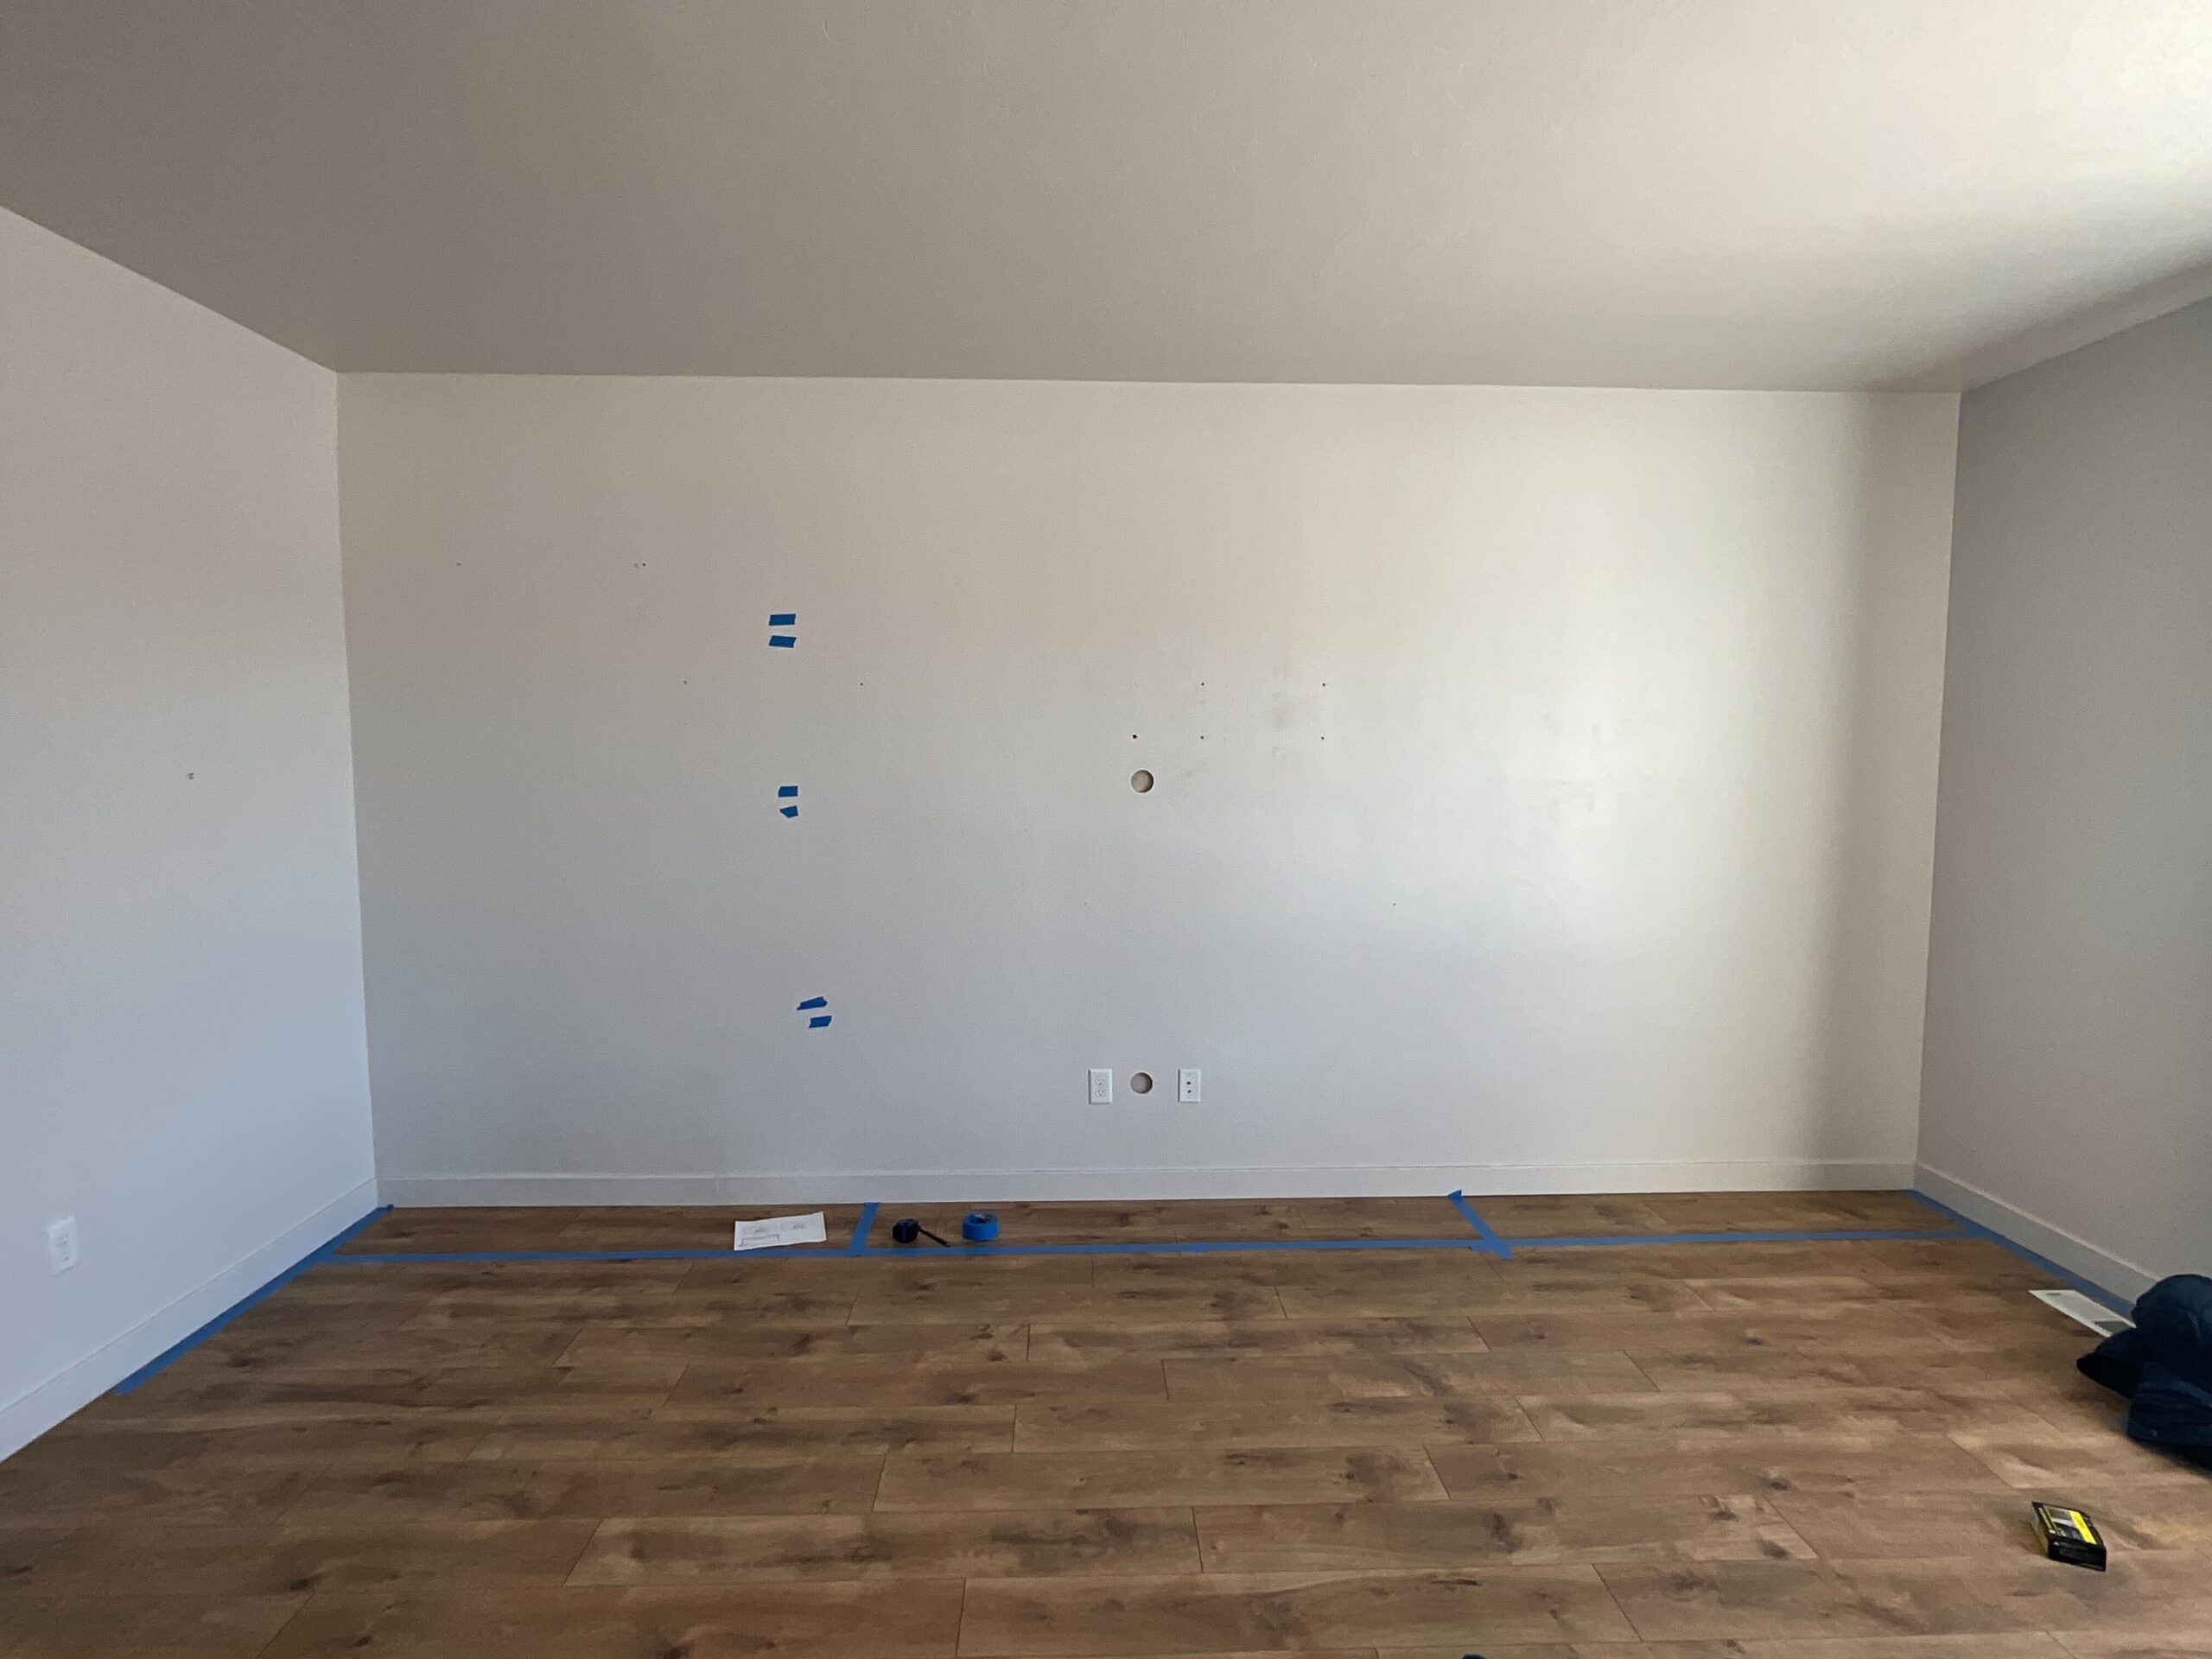 Before photo of a living room that Allied Remodeling Contractors in Lehi, Utah is remodeling. The finished project will include a fireplace and built in entertainment center.